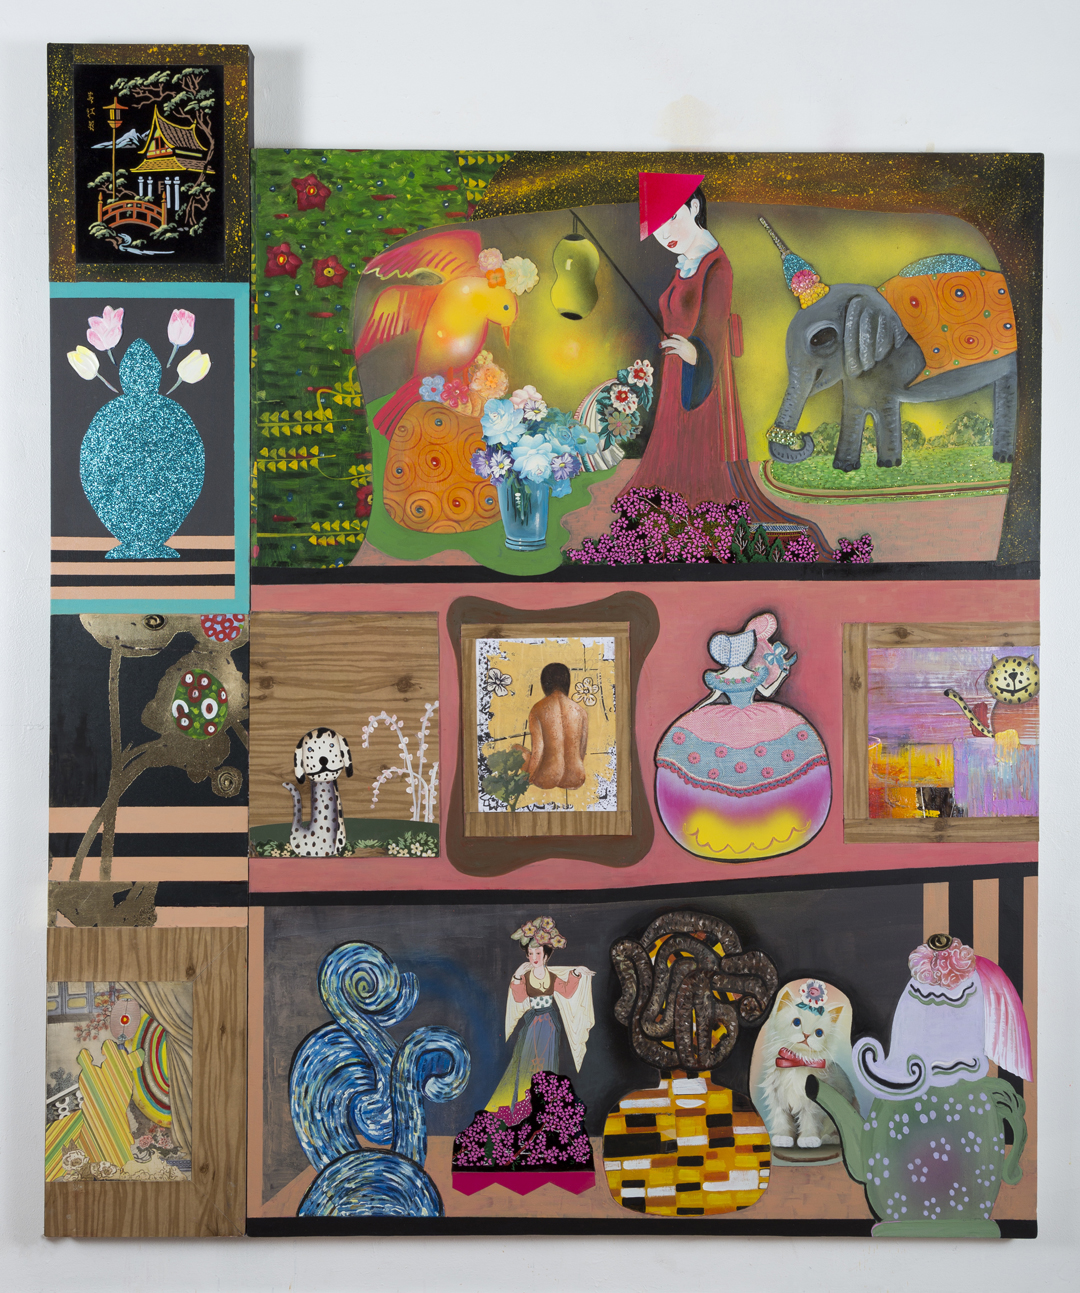 The Collector's Wife's Collection (All That She Owns), 71" × 60, mixed media and collage on canvas, 2016